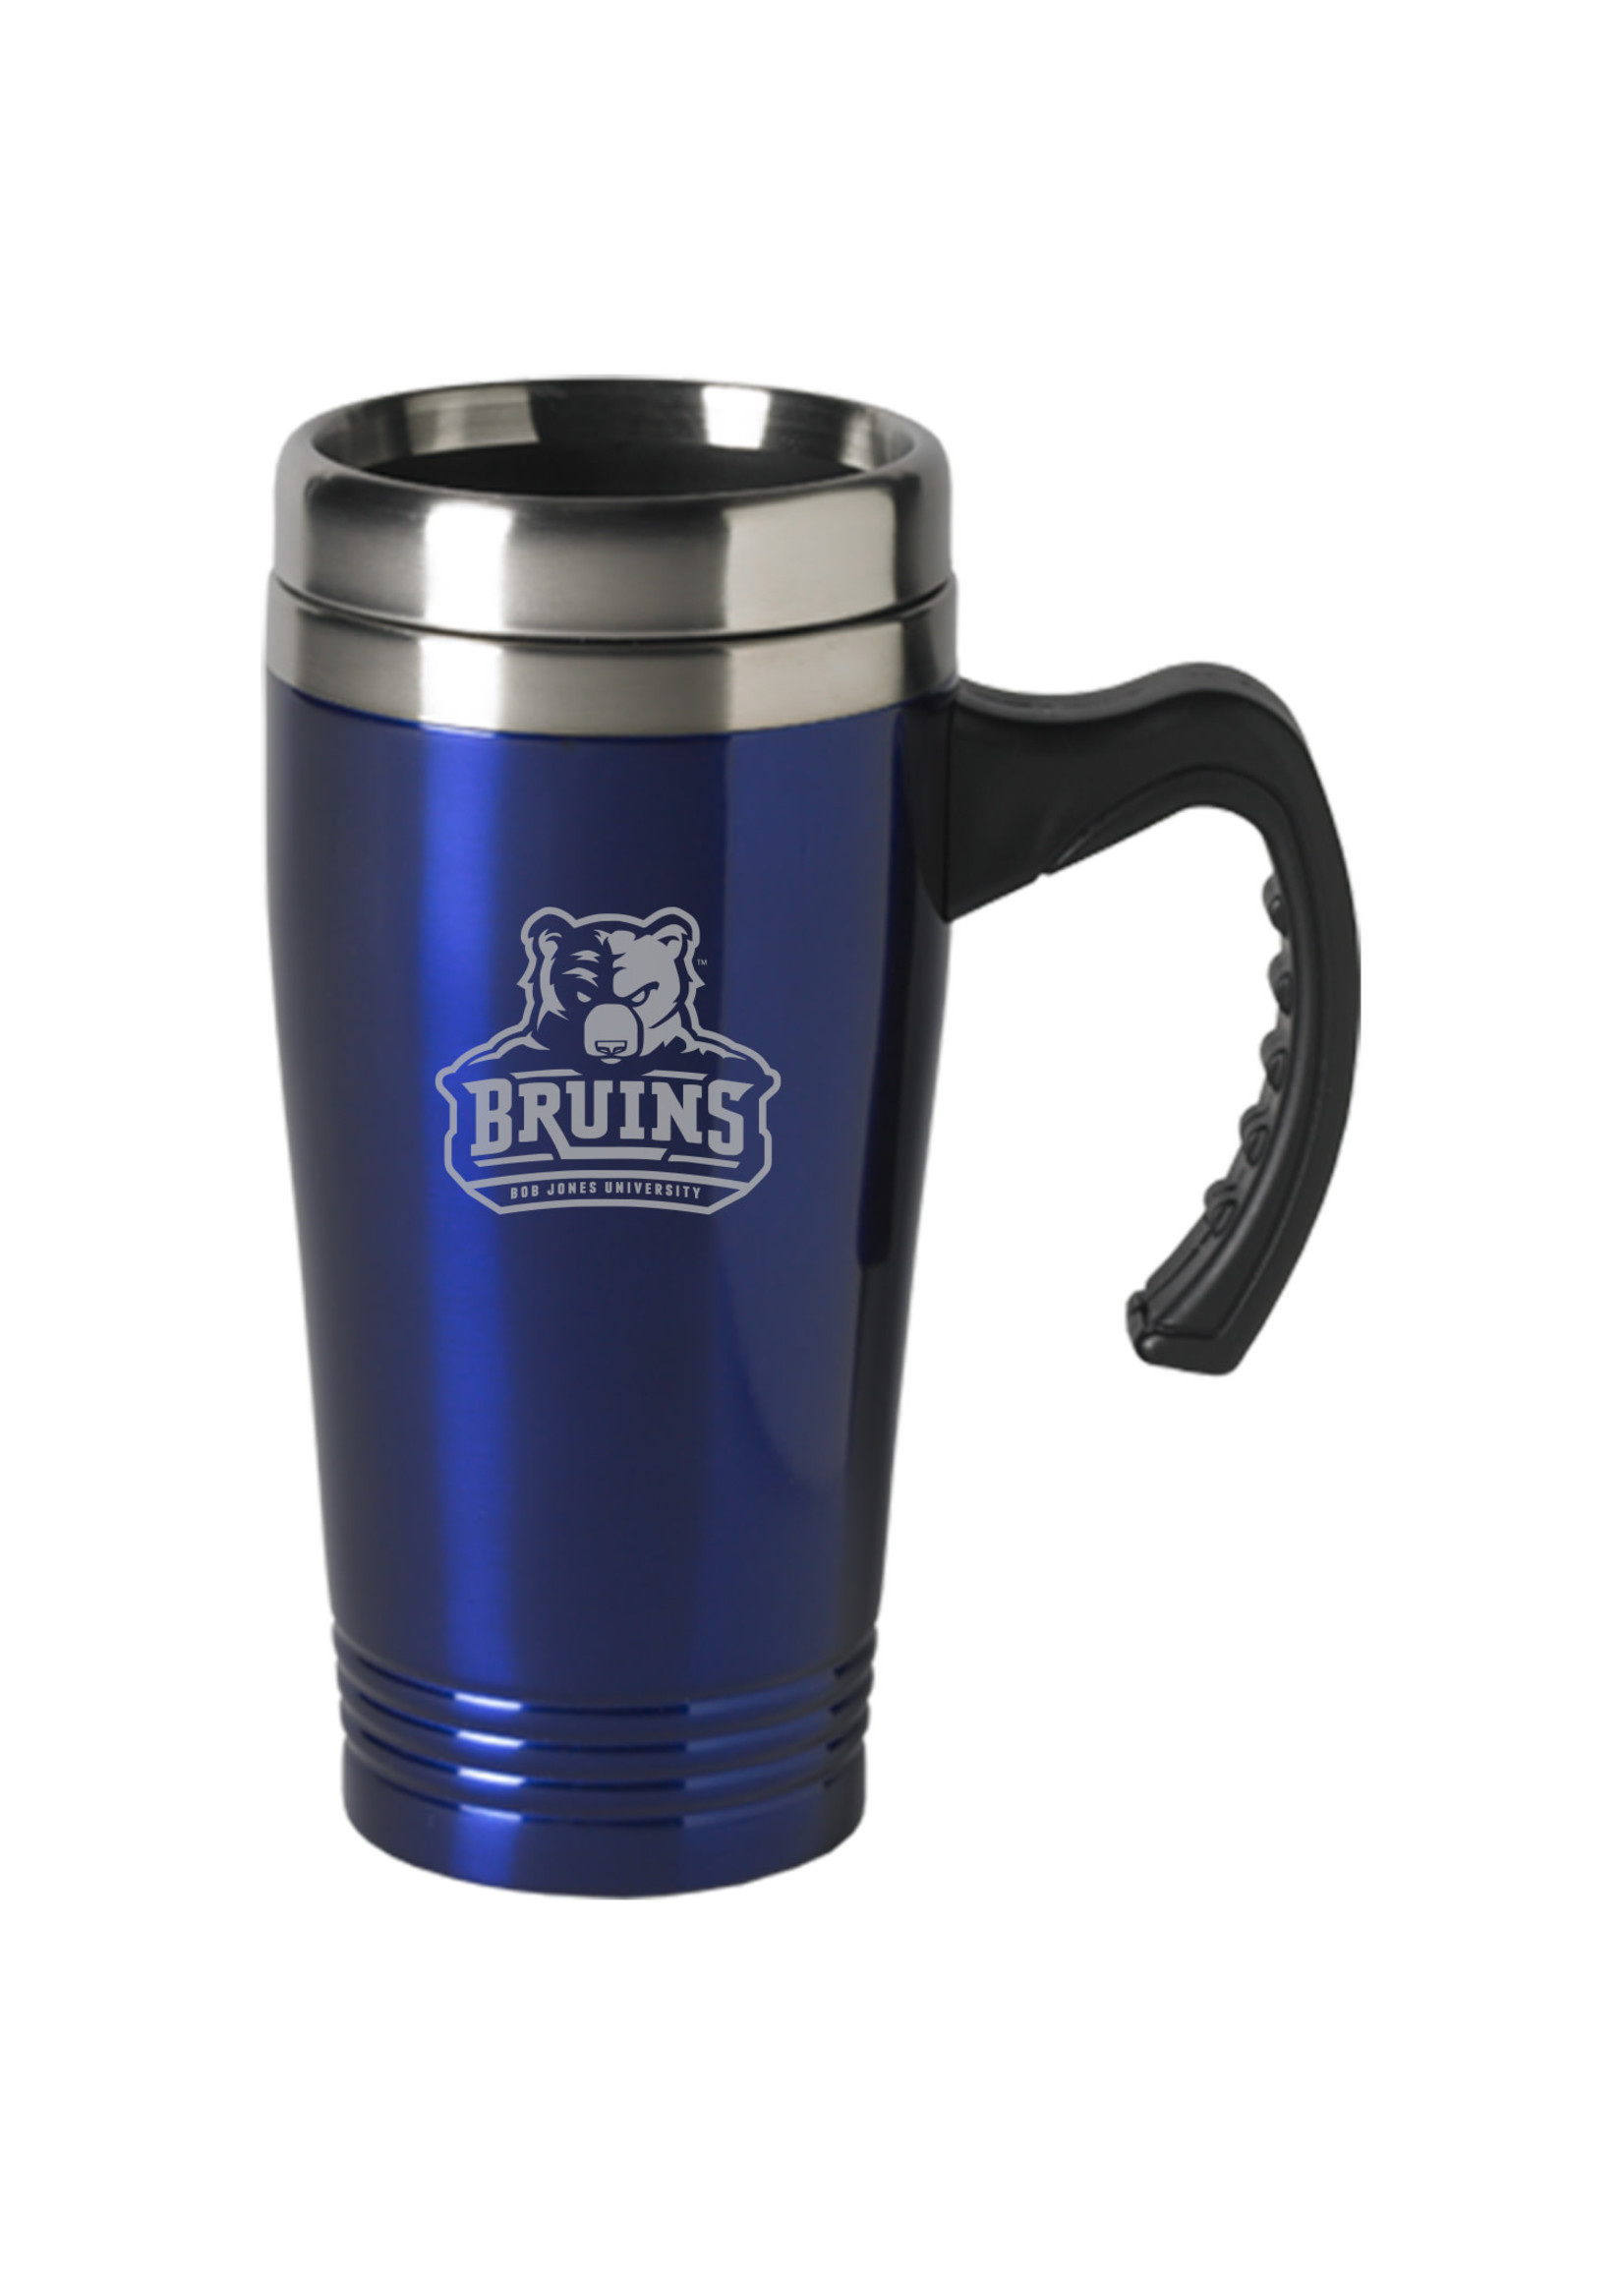 Bruins 16 oz Stainless Steel Travel Mug with Handle Blue